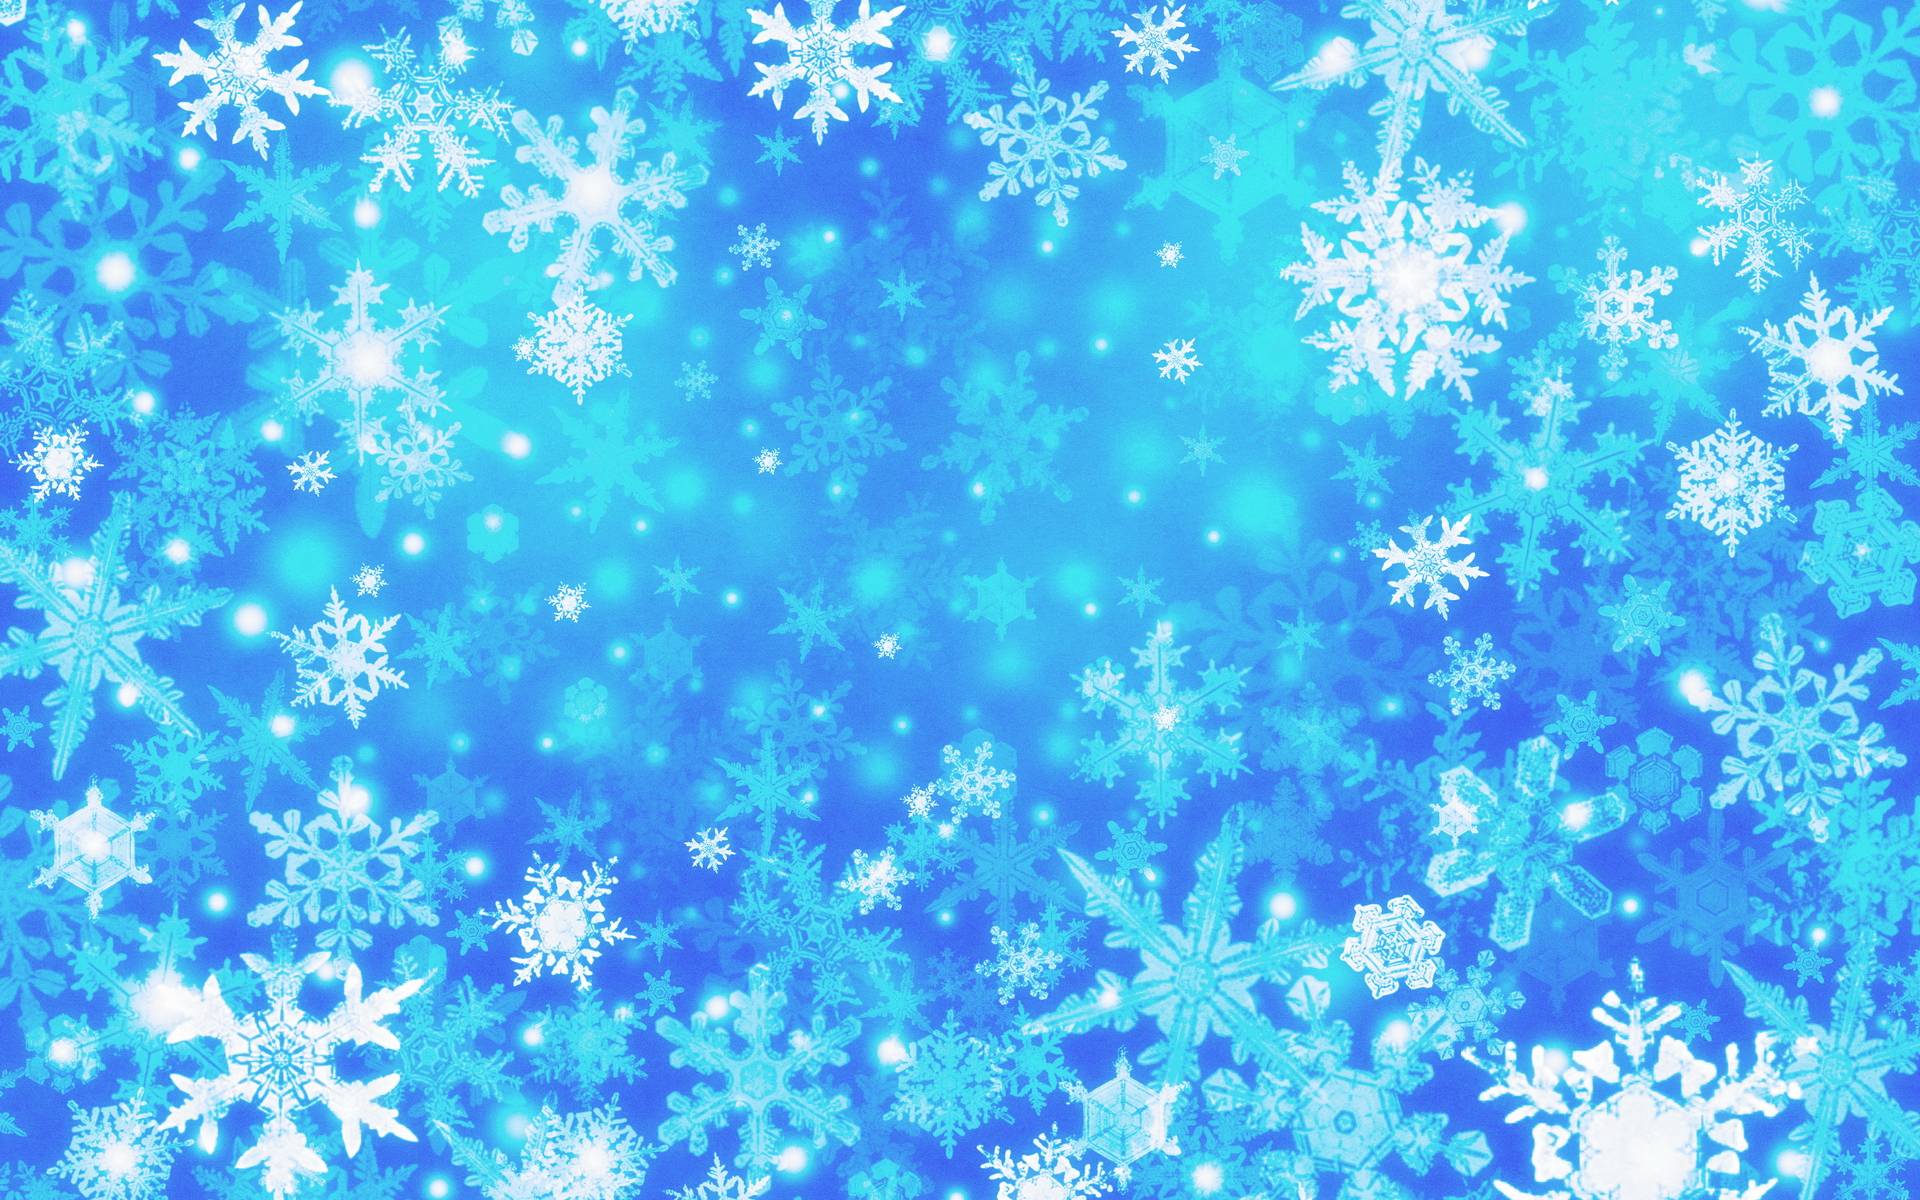 Free Download Snow Graphic Wallpaper in 1920x1200 resolutions